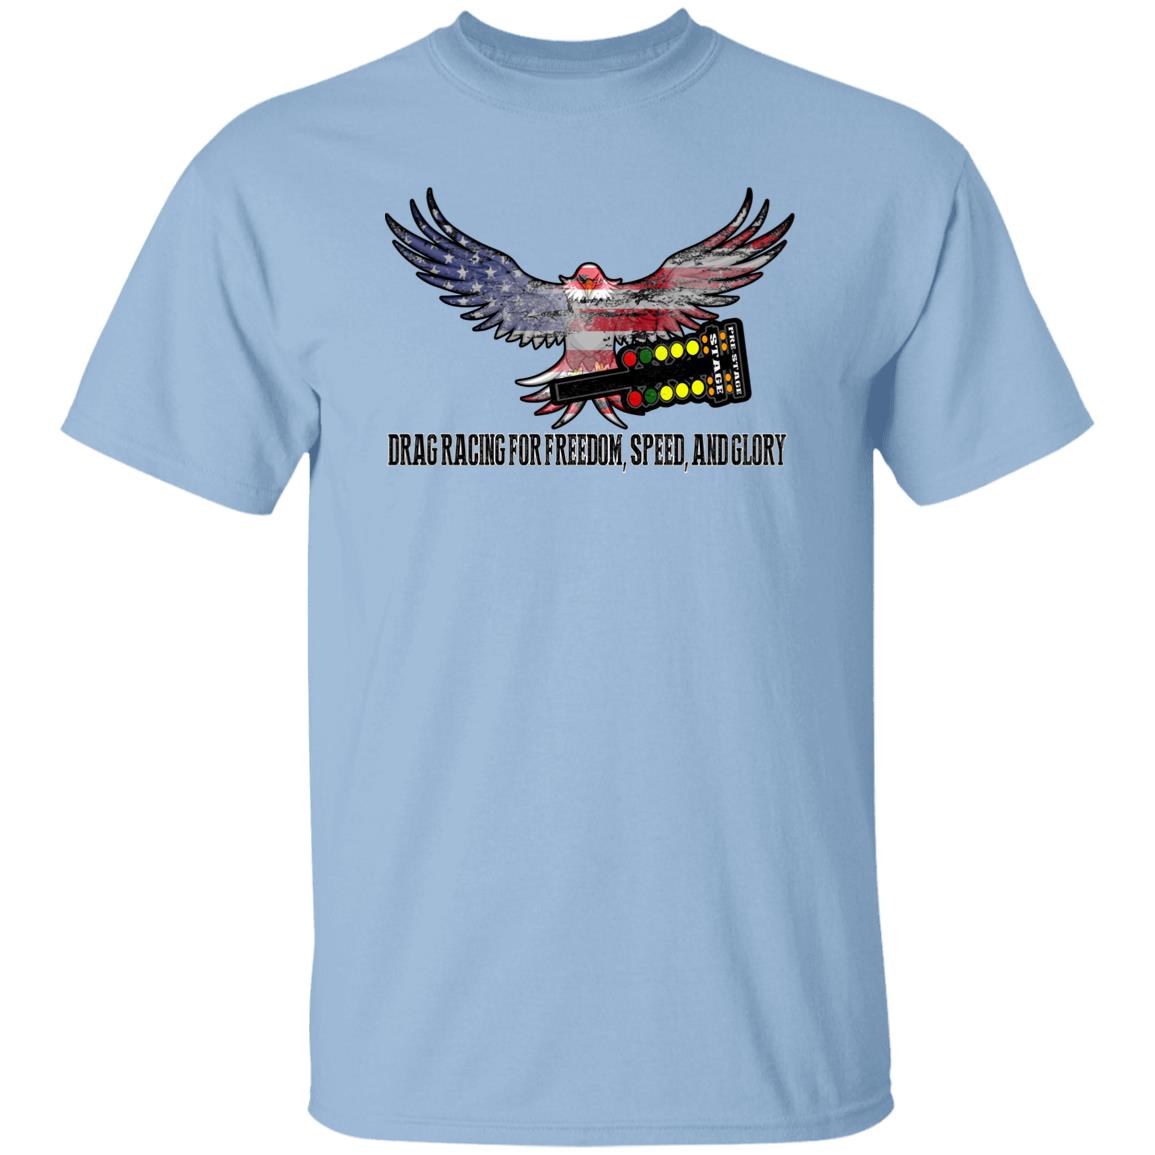 Drag Racing for Freedom, Speed, and Glory T-Shirt